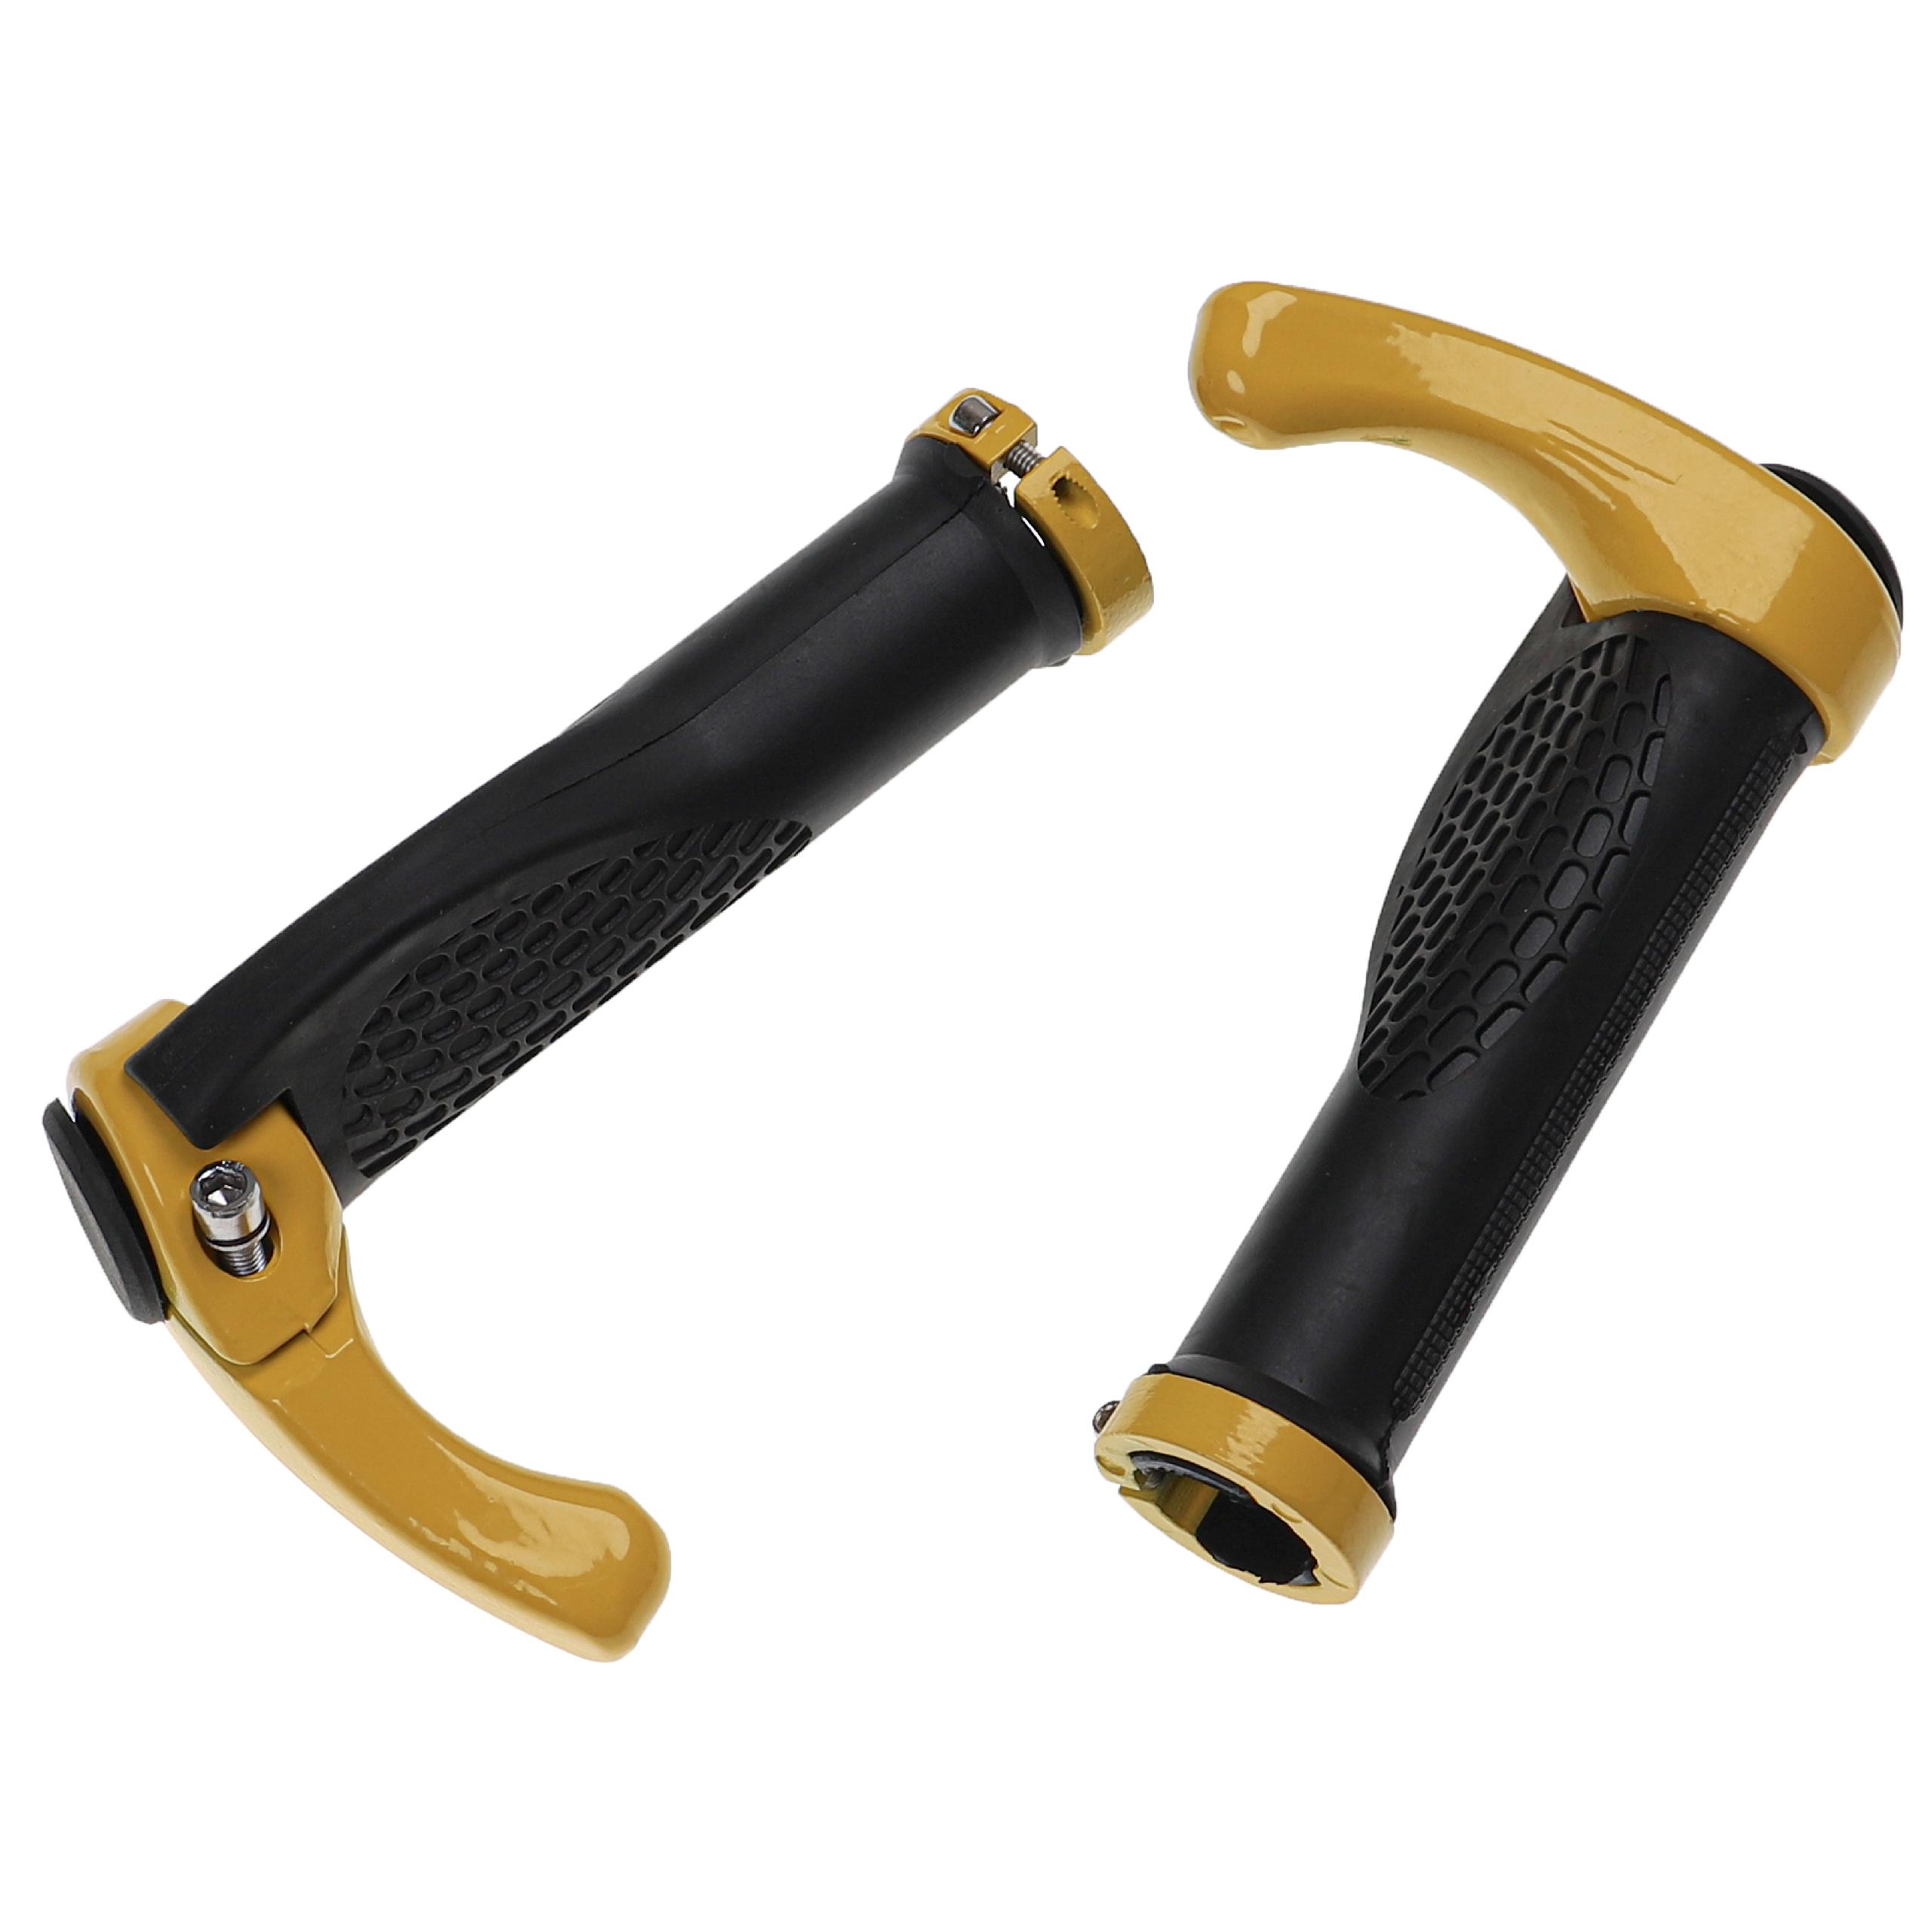 2x Handlebar Grips suitable for Bicycle, Mountain Bike - Hand Grips with Bar Ends, Ergonomic, Yellow Black